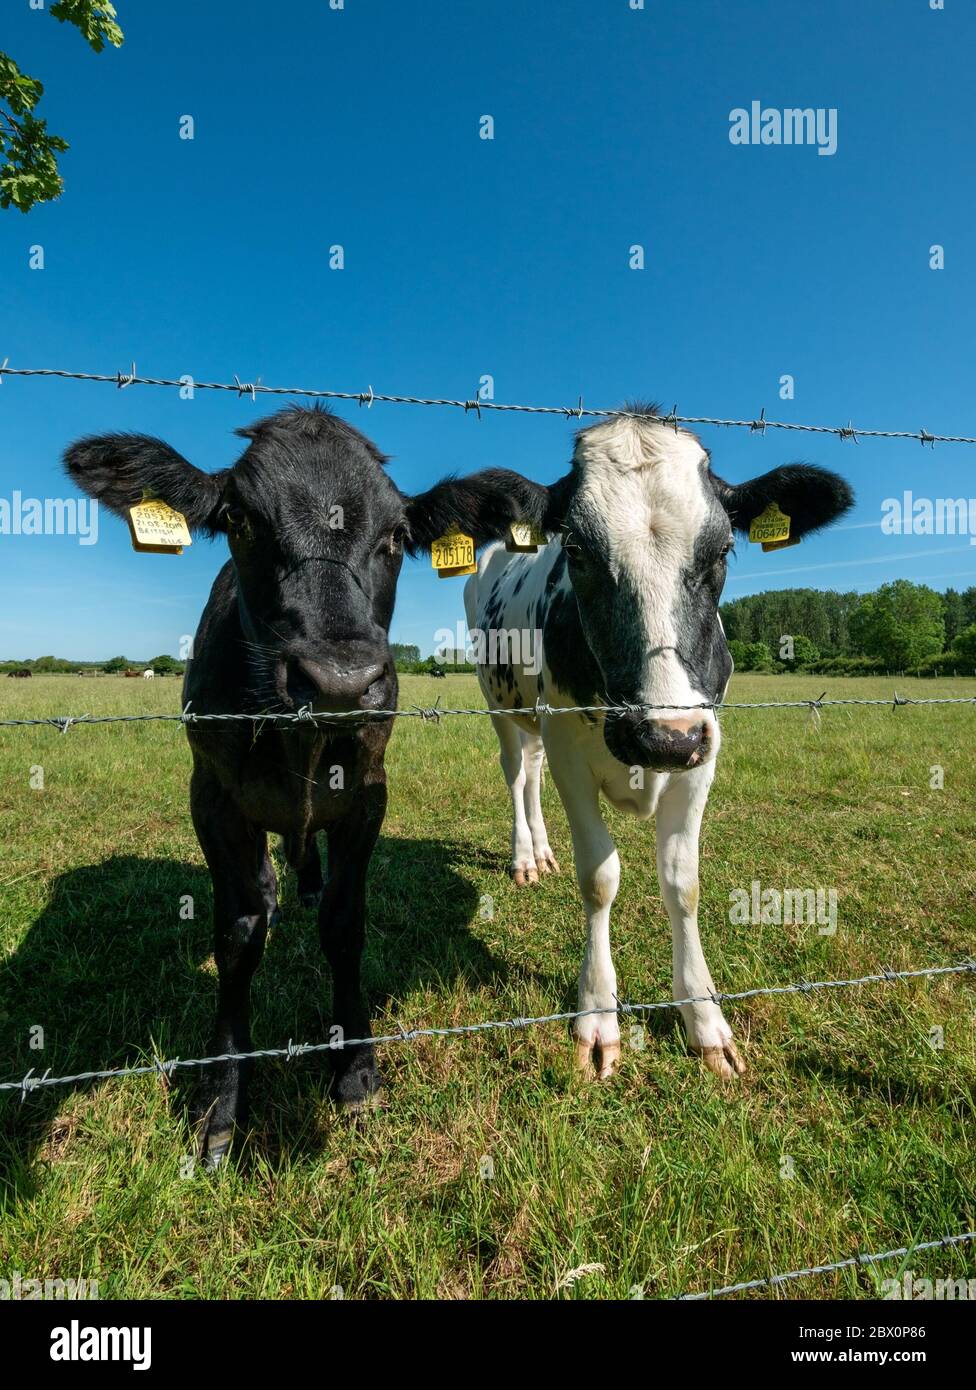 Closeup of two young black and white cows looking towards camera through strands of barded wire fencing, Leicestershire, England, UK Stock Photo